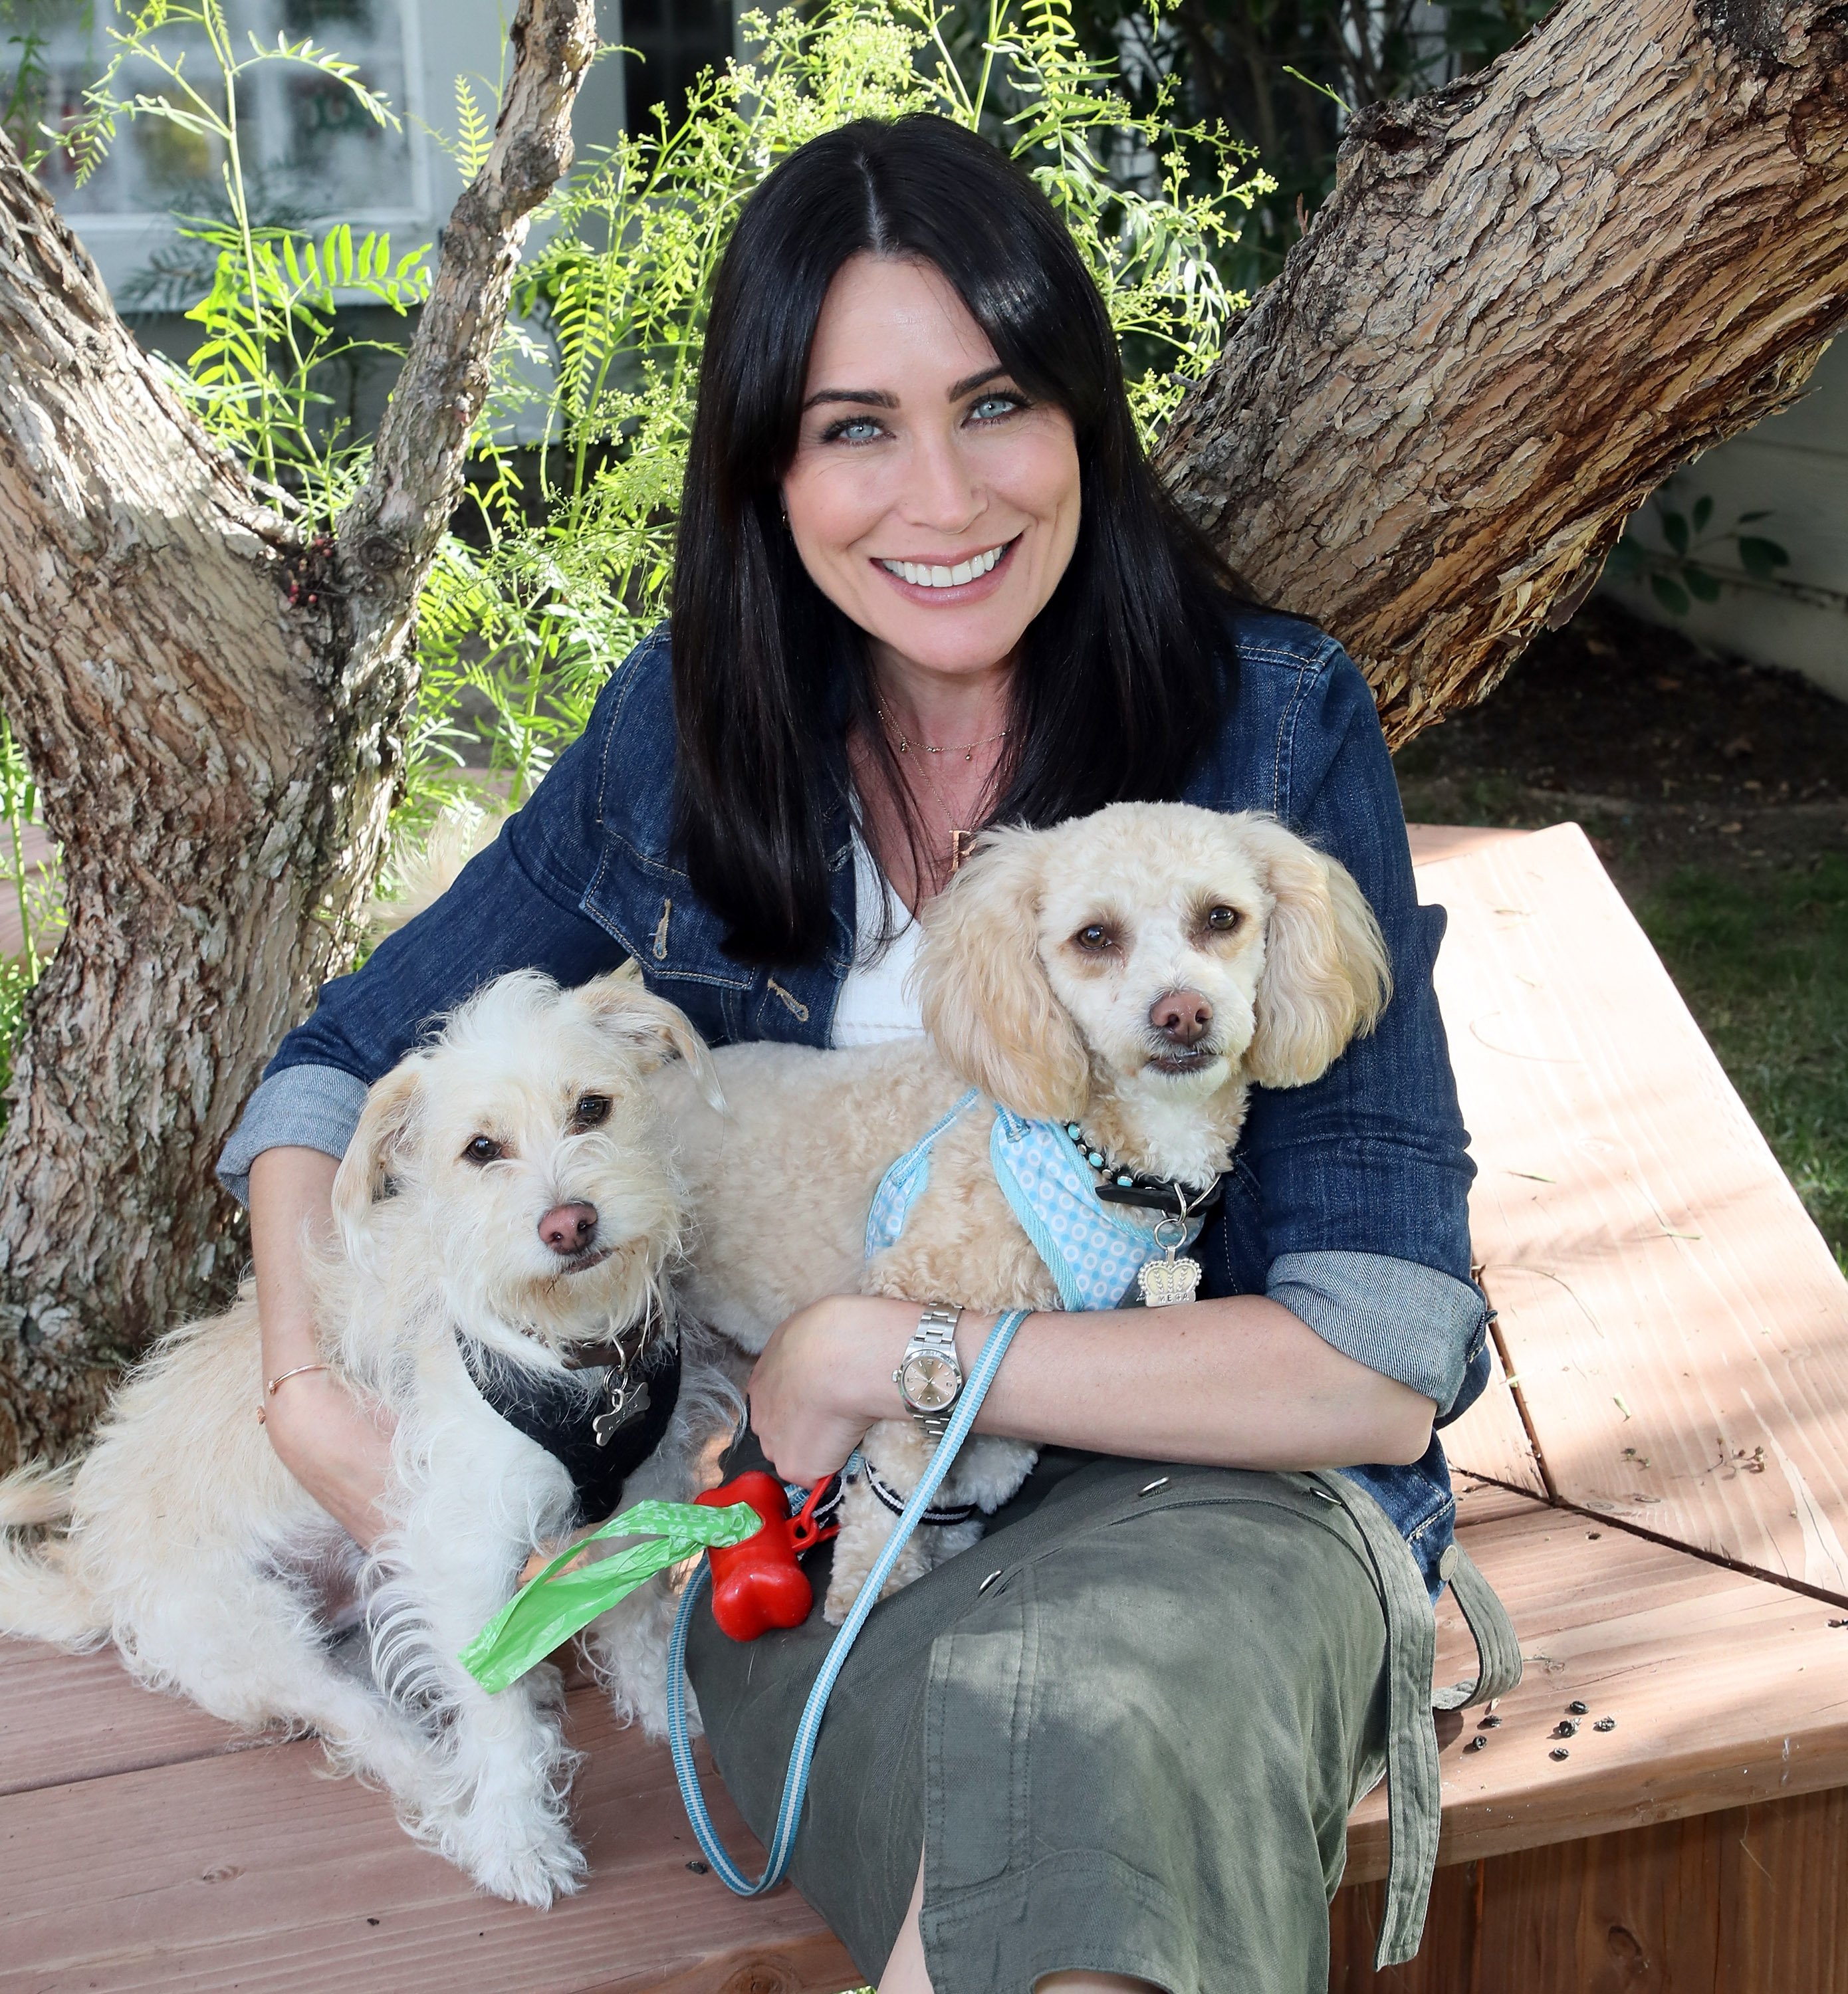 'The Bold and the Beautiful' star Rena Sofer poses with two dogs during a visit to Hallmark's 'Home & Family.'